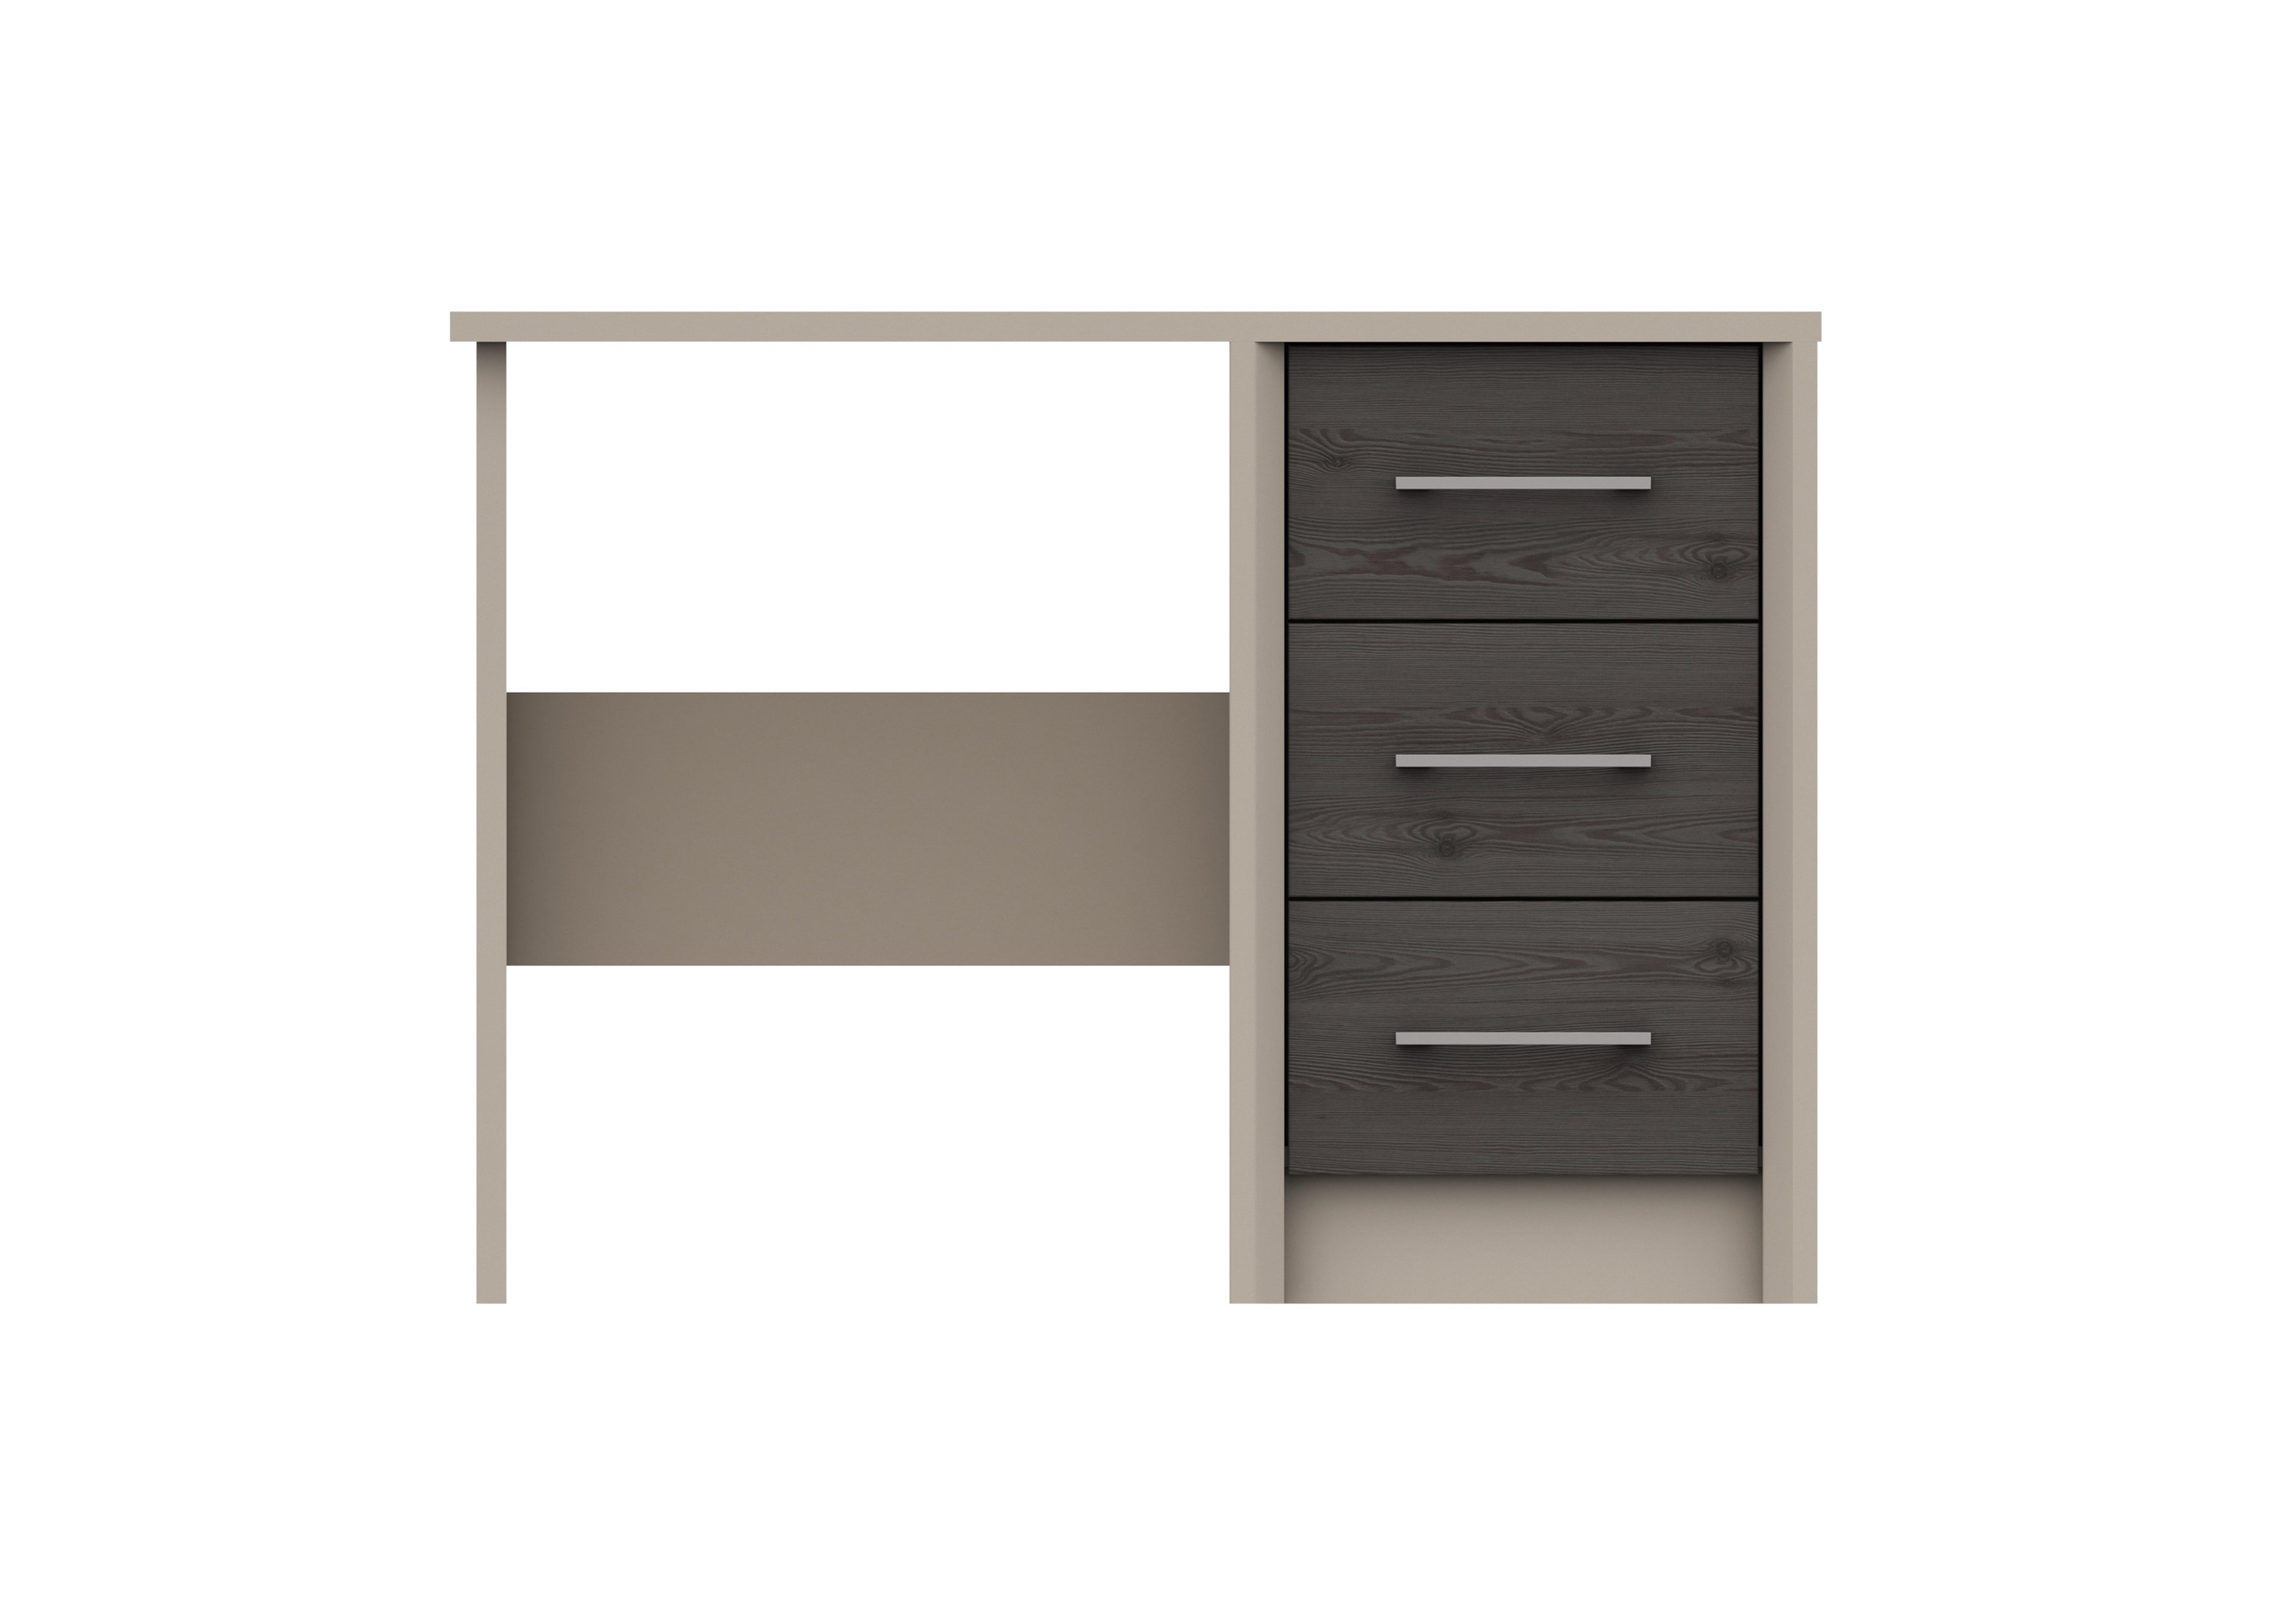 Paddington Dressing Table in Fired Earth/Anthracite Larch on Furniture Village